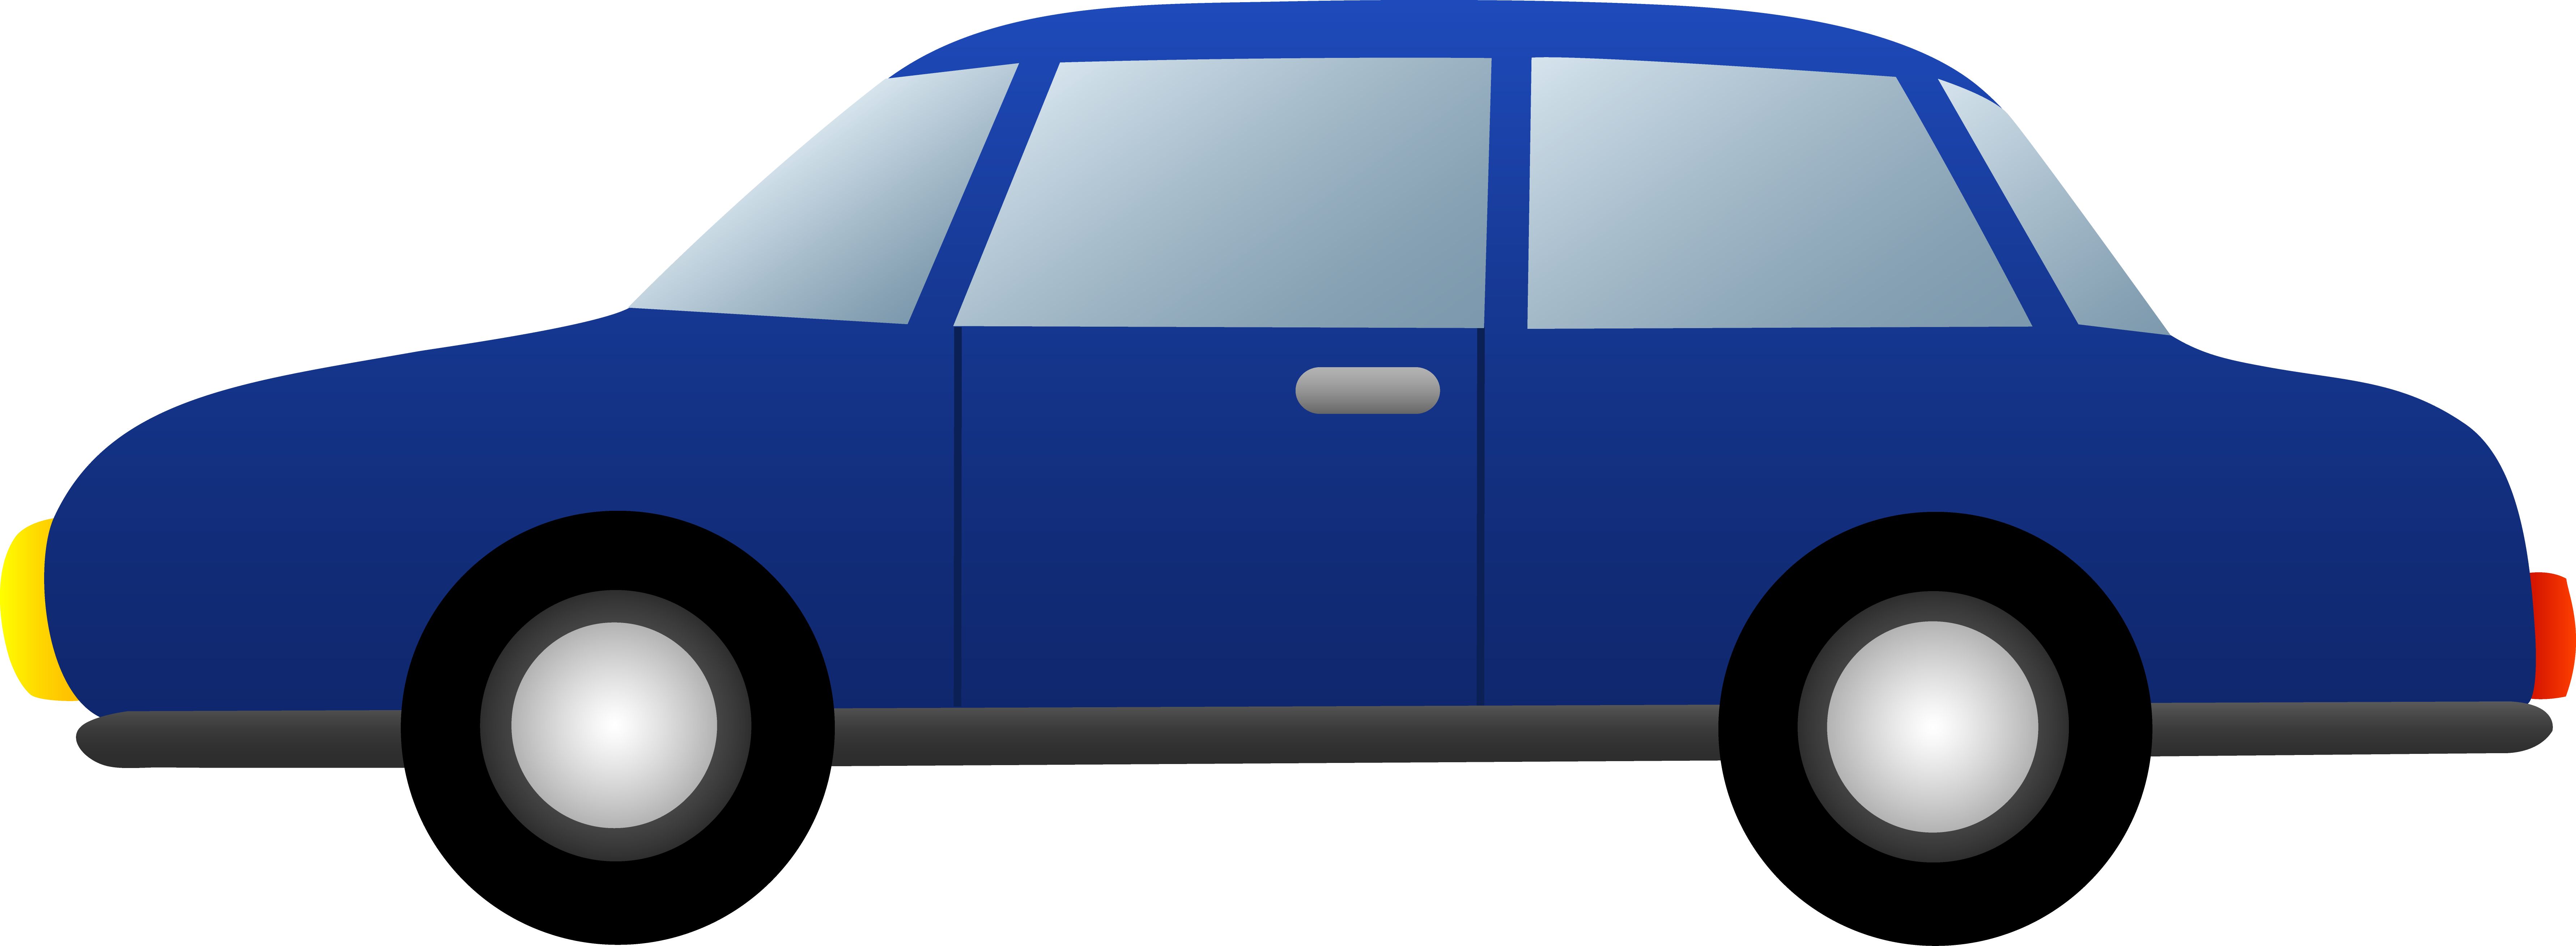 Vehicle clipart #4, Download drawings